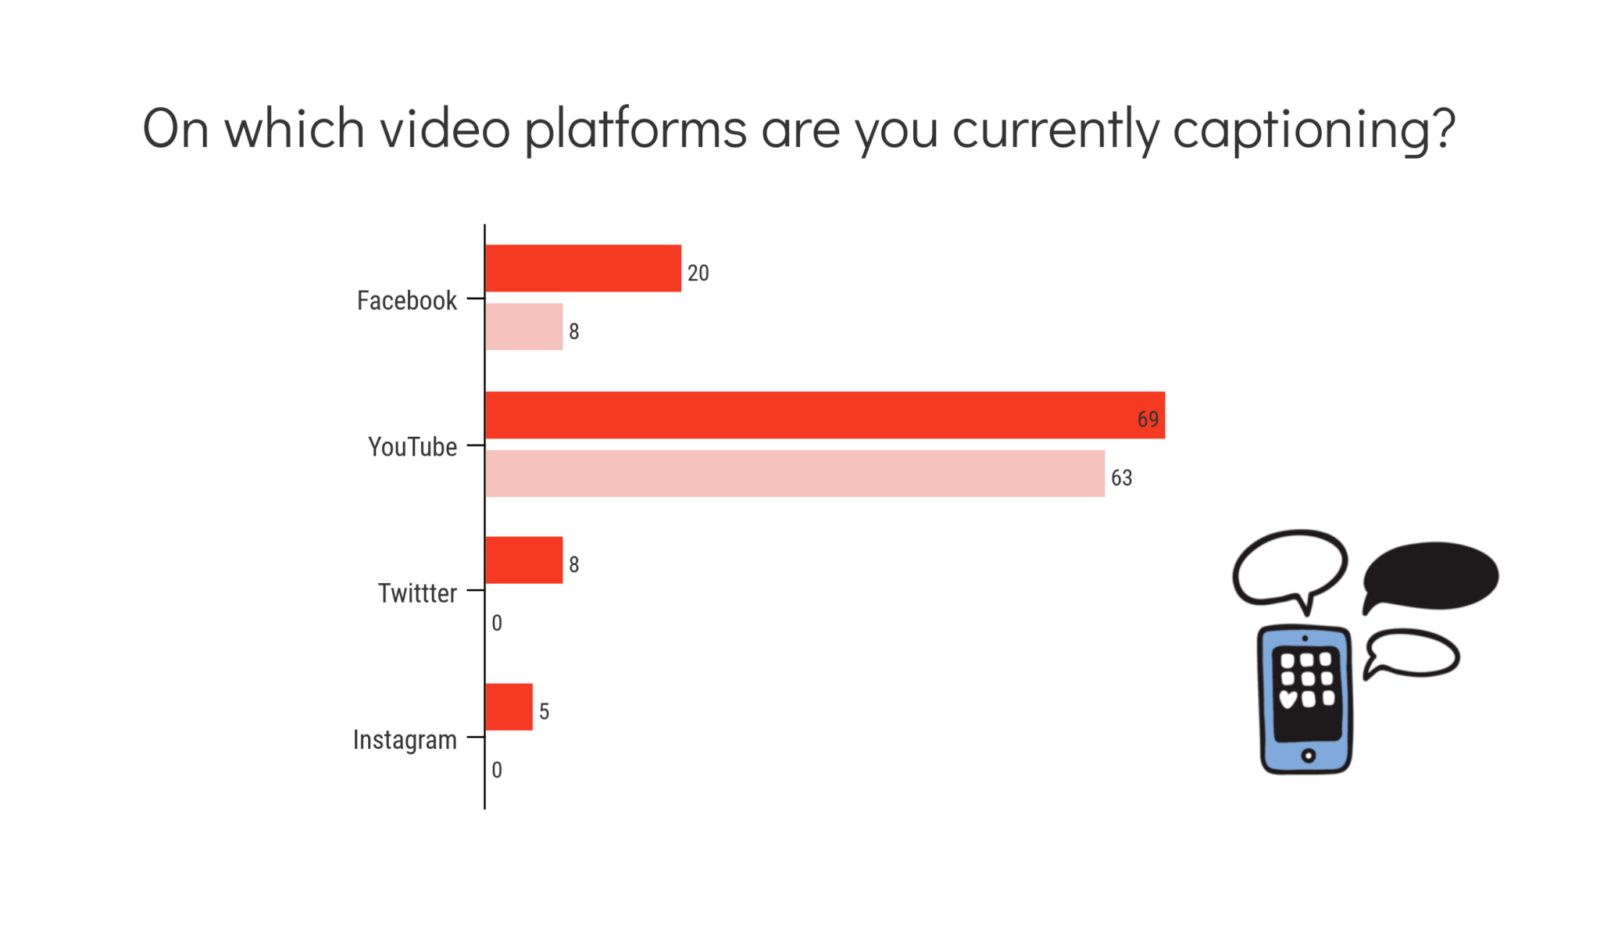 on which platforms do you publish video? comparions of 2017 and 2018 respondednts. For facebook results said 23% and 39% for 2017 and 2018 respectively. for youtube 63% and 78%, Twitter 0% and 19% and instagram 0% and 12%.